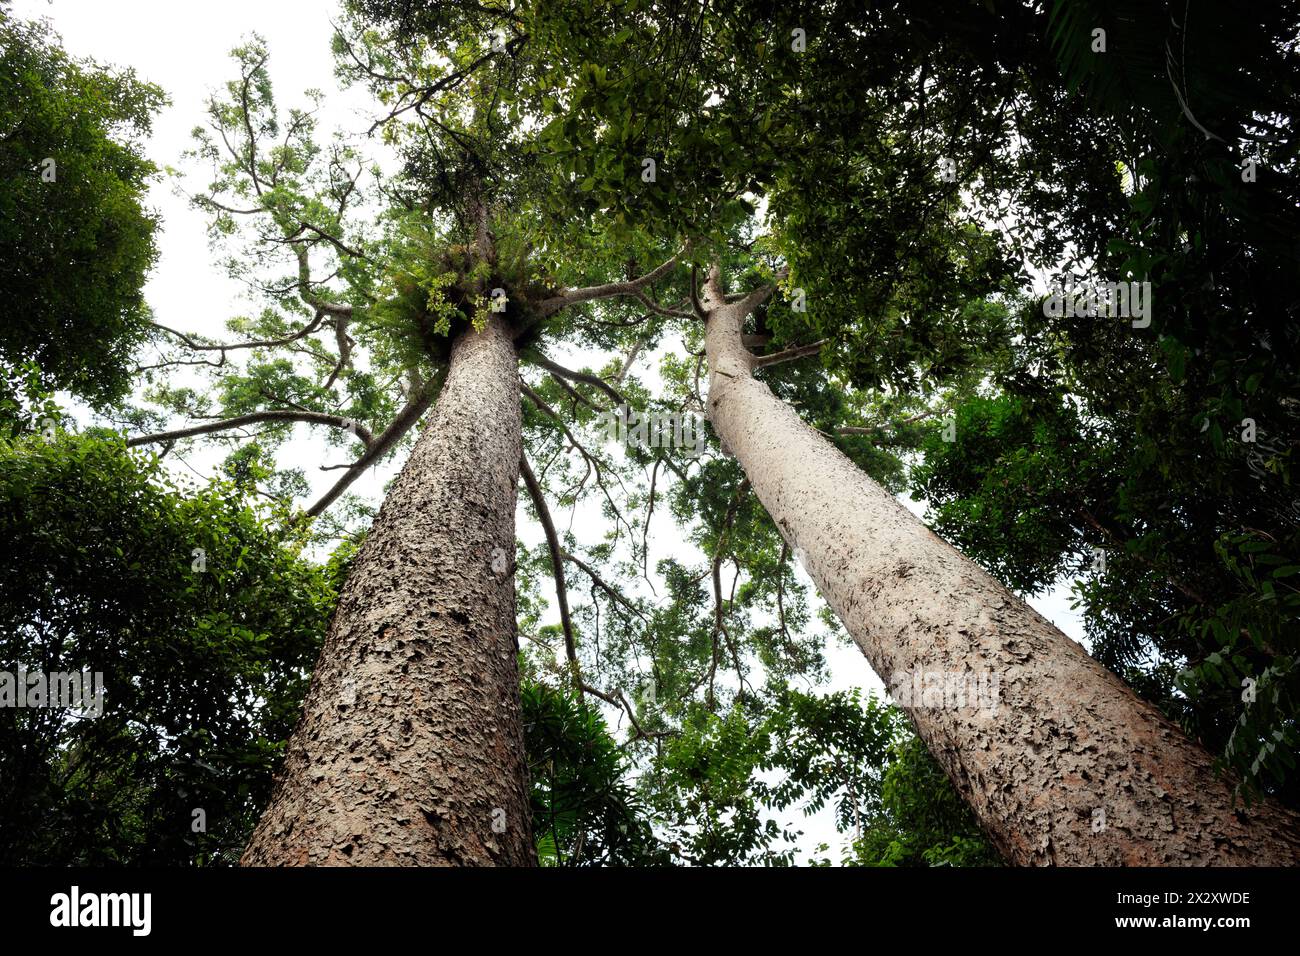 Kauri Pine (Agathis robusta) at Lake Barrine in Crater Lakes National Park, Queensland, Australia Stock Photo